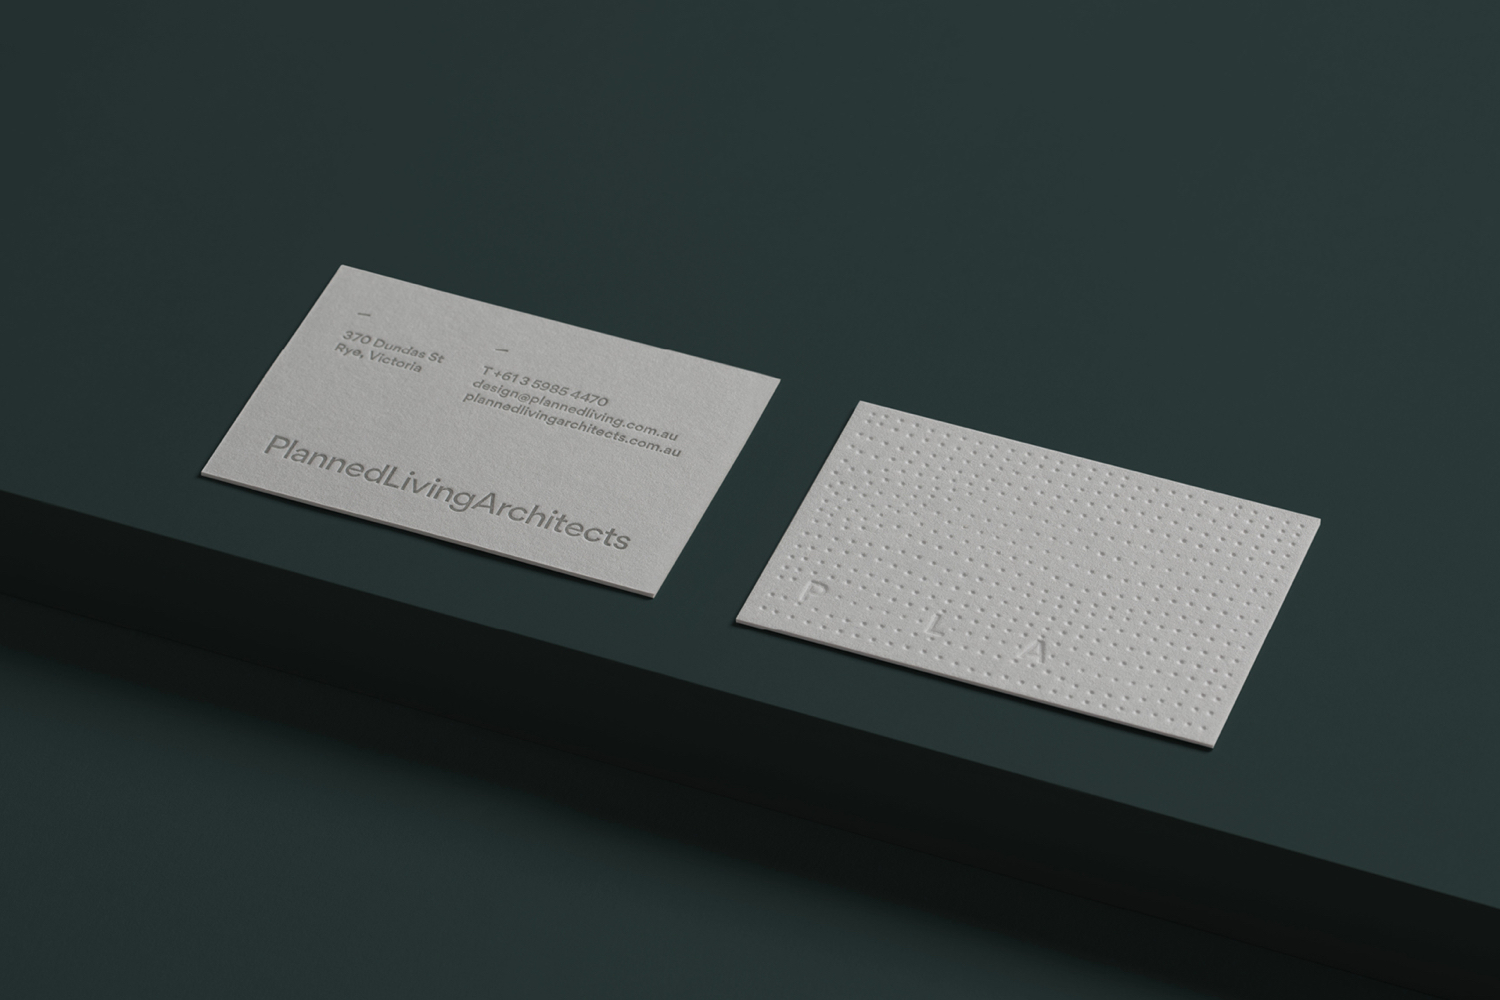 New logotype, folder, embossed business cards and illustration by A Friend Of Mine for Planned Living Architects.